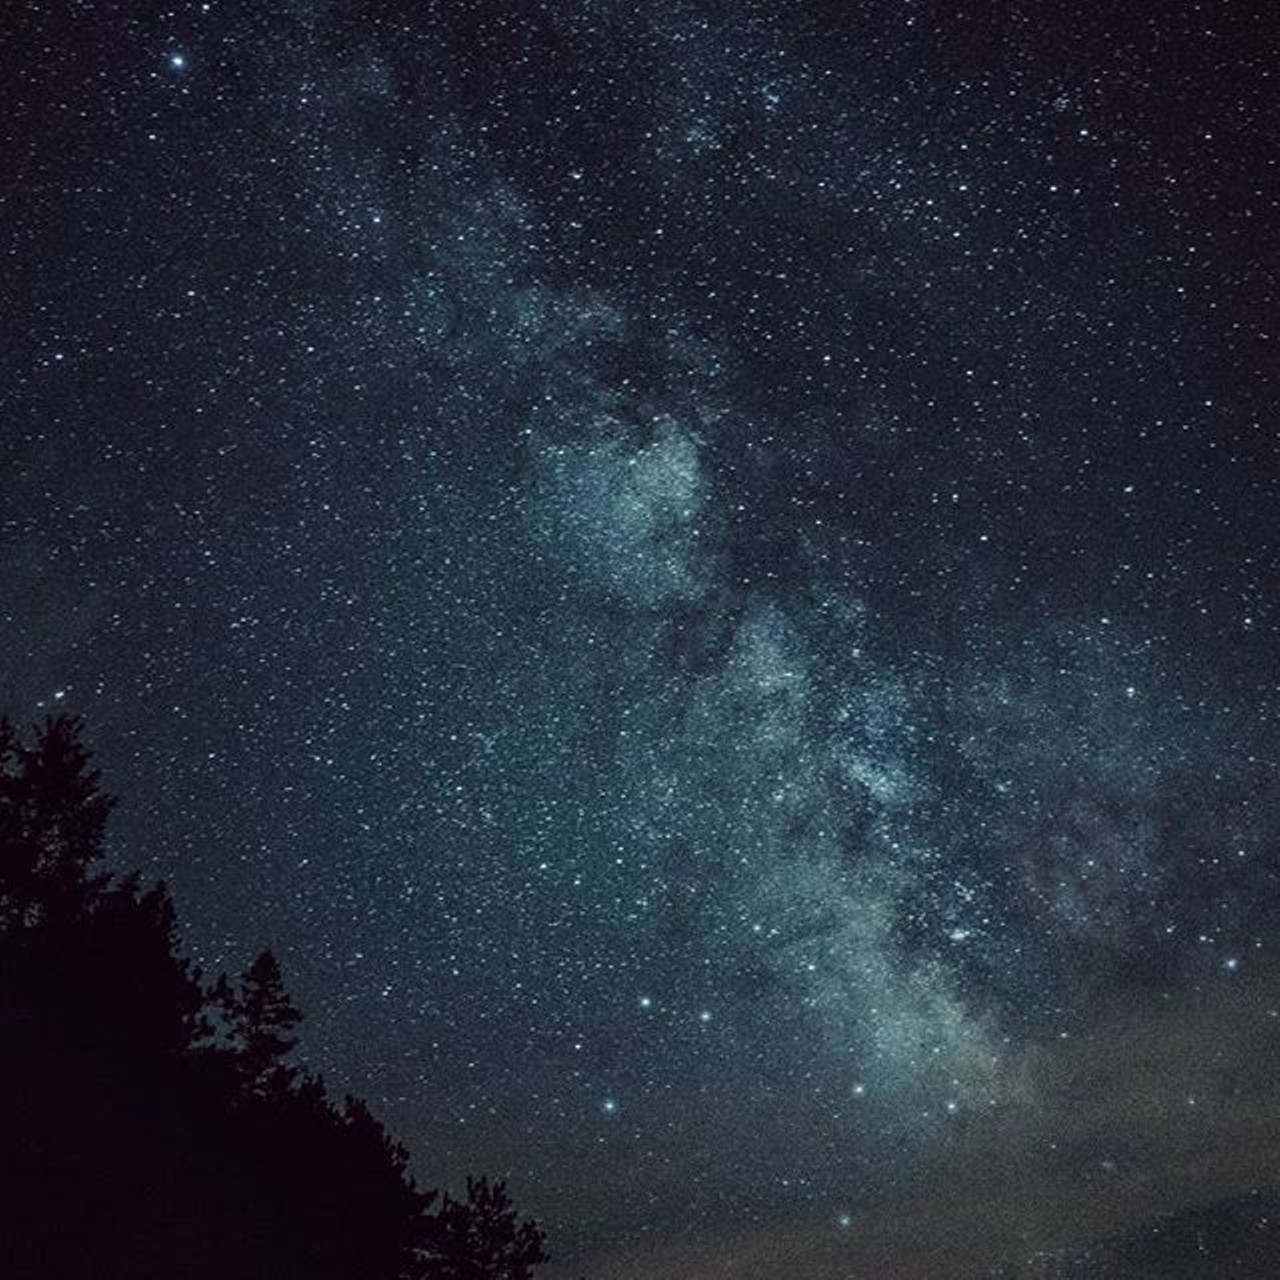 Headlands International Dark Sky Park, Mackinaw City 
The stars are hard to see with all of our light pollution, but this dark sky park stretches 550 acres without a street lamp in sight, exposing the brightest stars and sending you into space.(Photo via Instagram, @chrstphjmyr)